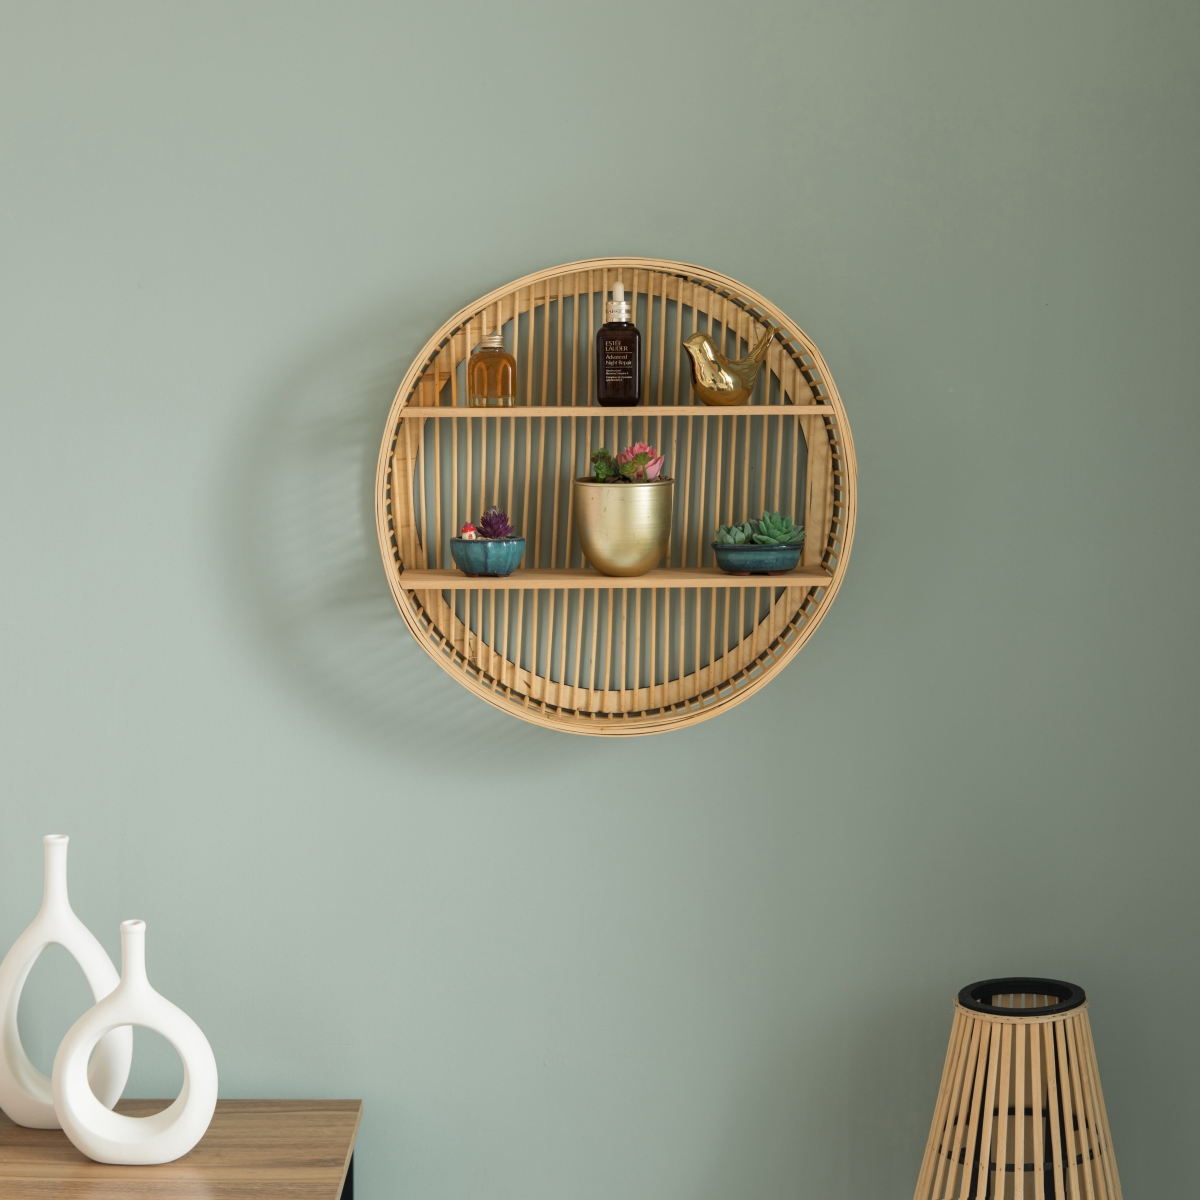 Picture of Vintiquewise QI004514 Decorative Rattan Round Display Shelf With 2 Shelves for The Dining Room, Living Room, or Office.